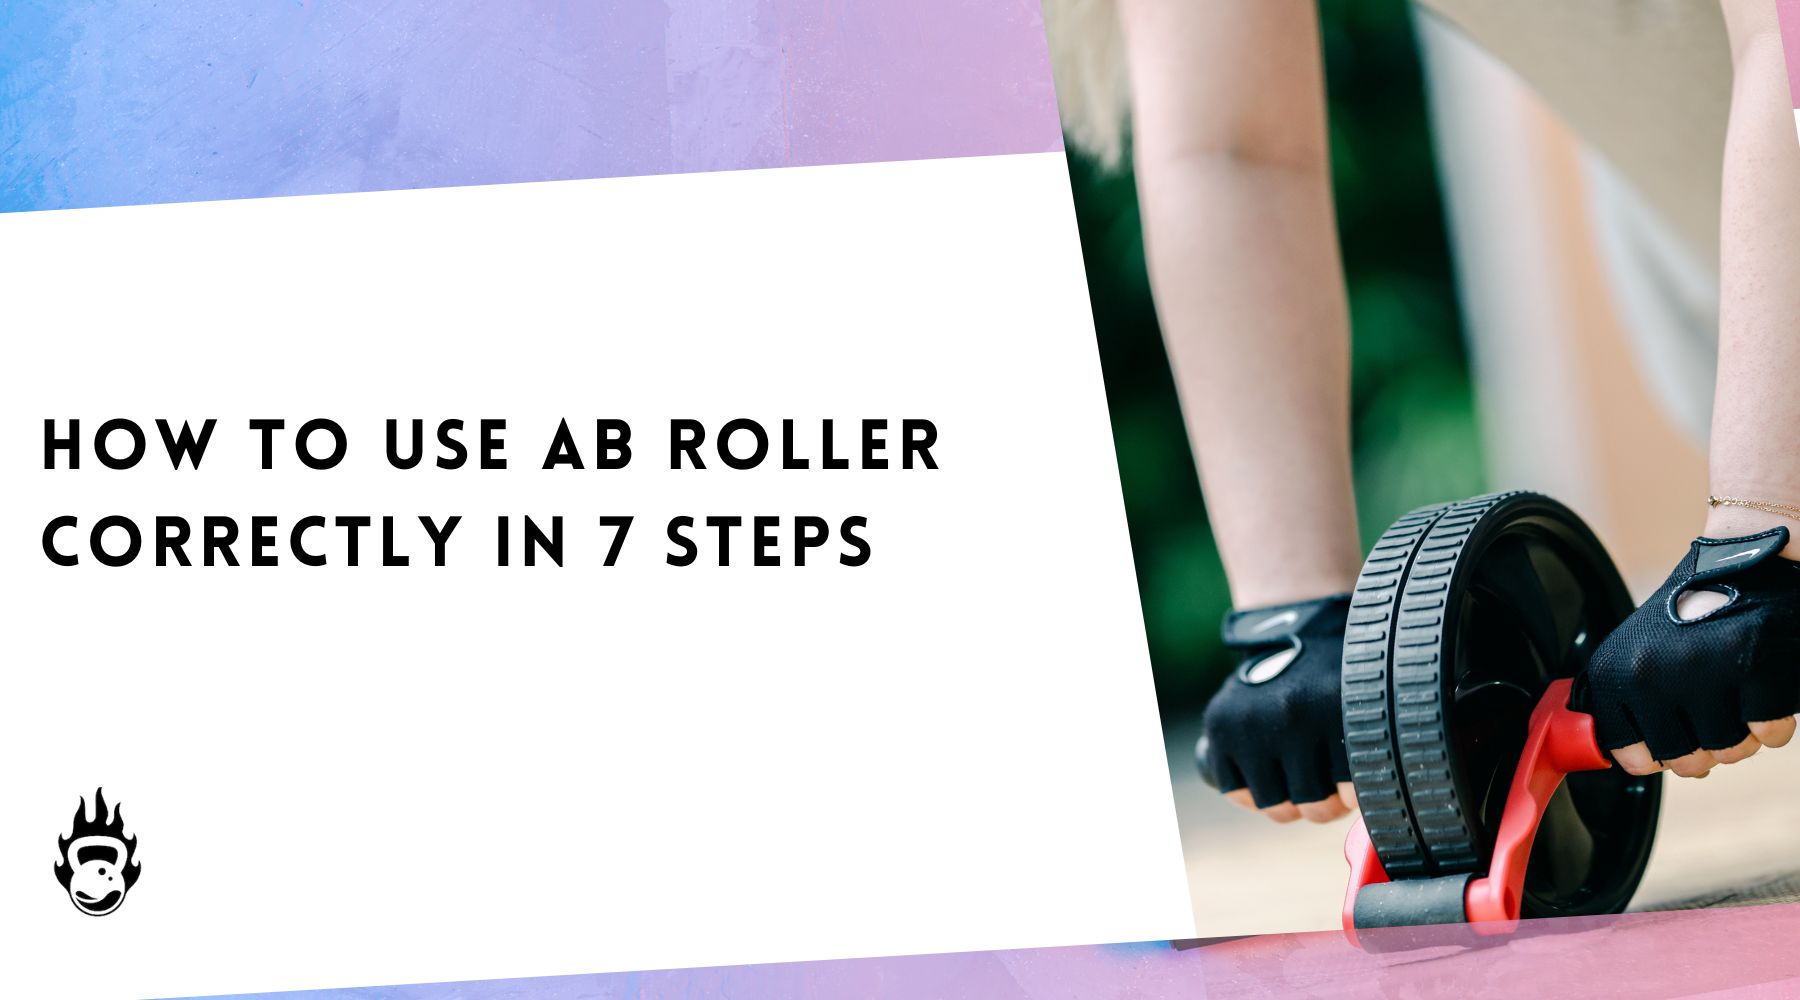 How to Use an Ab Roller